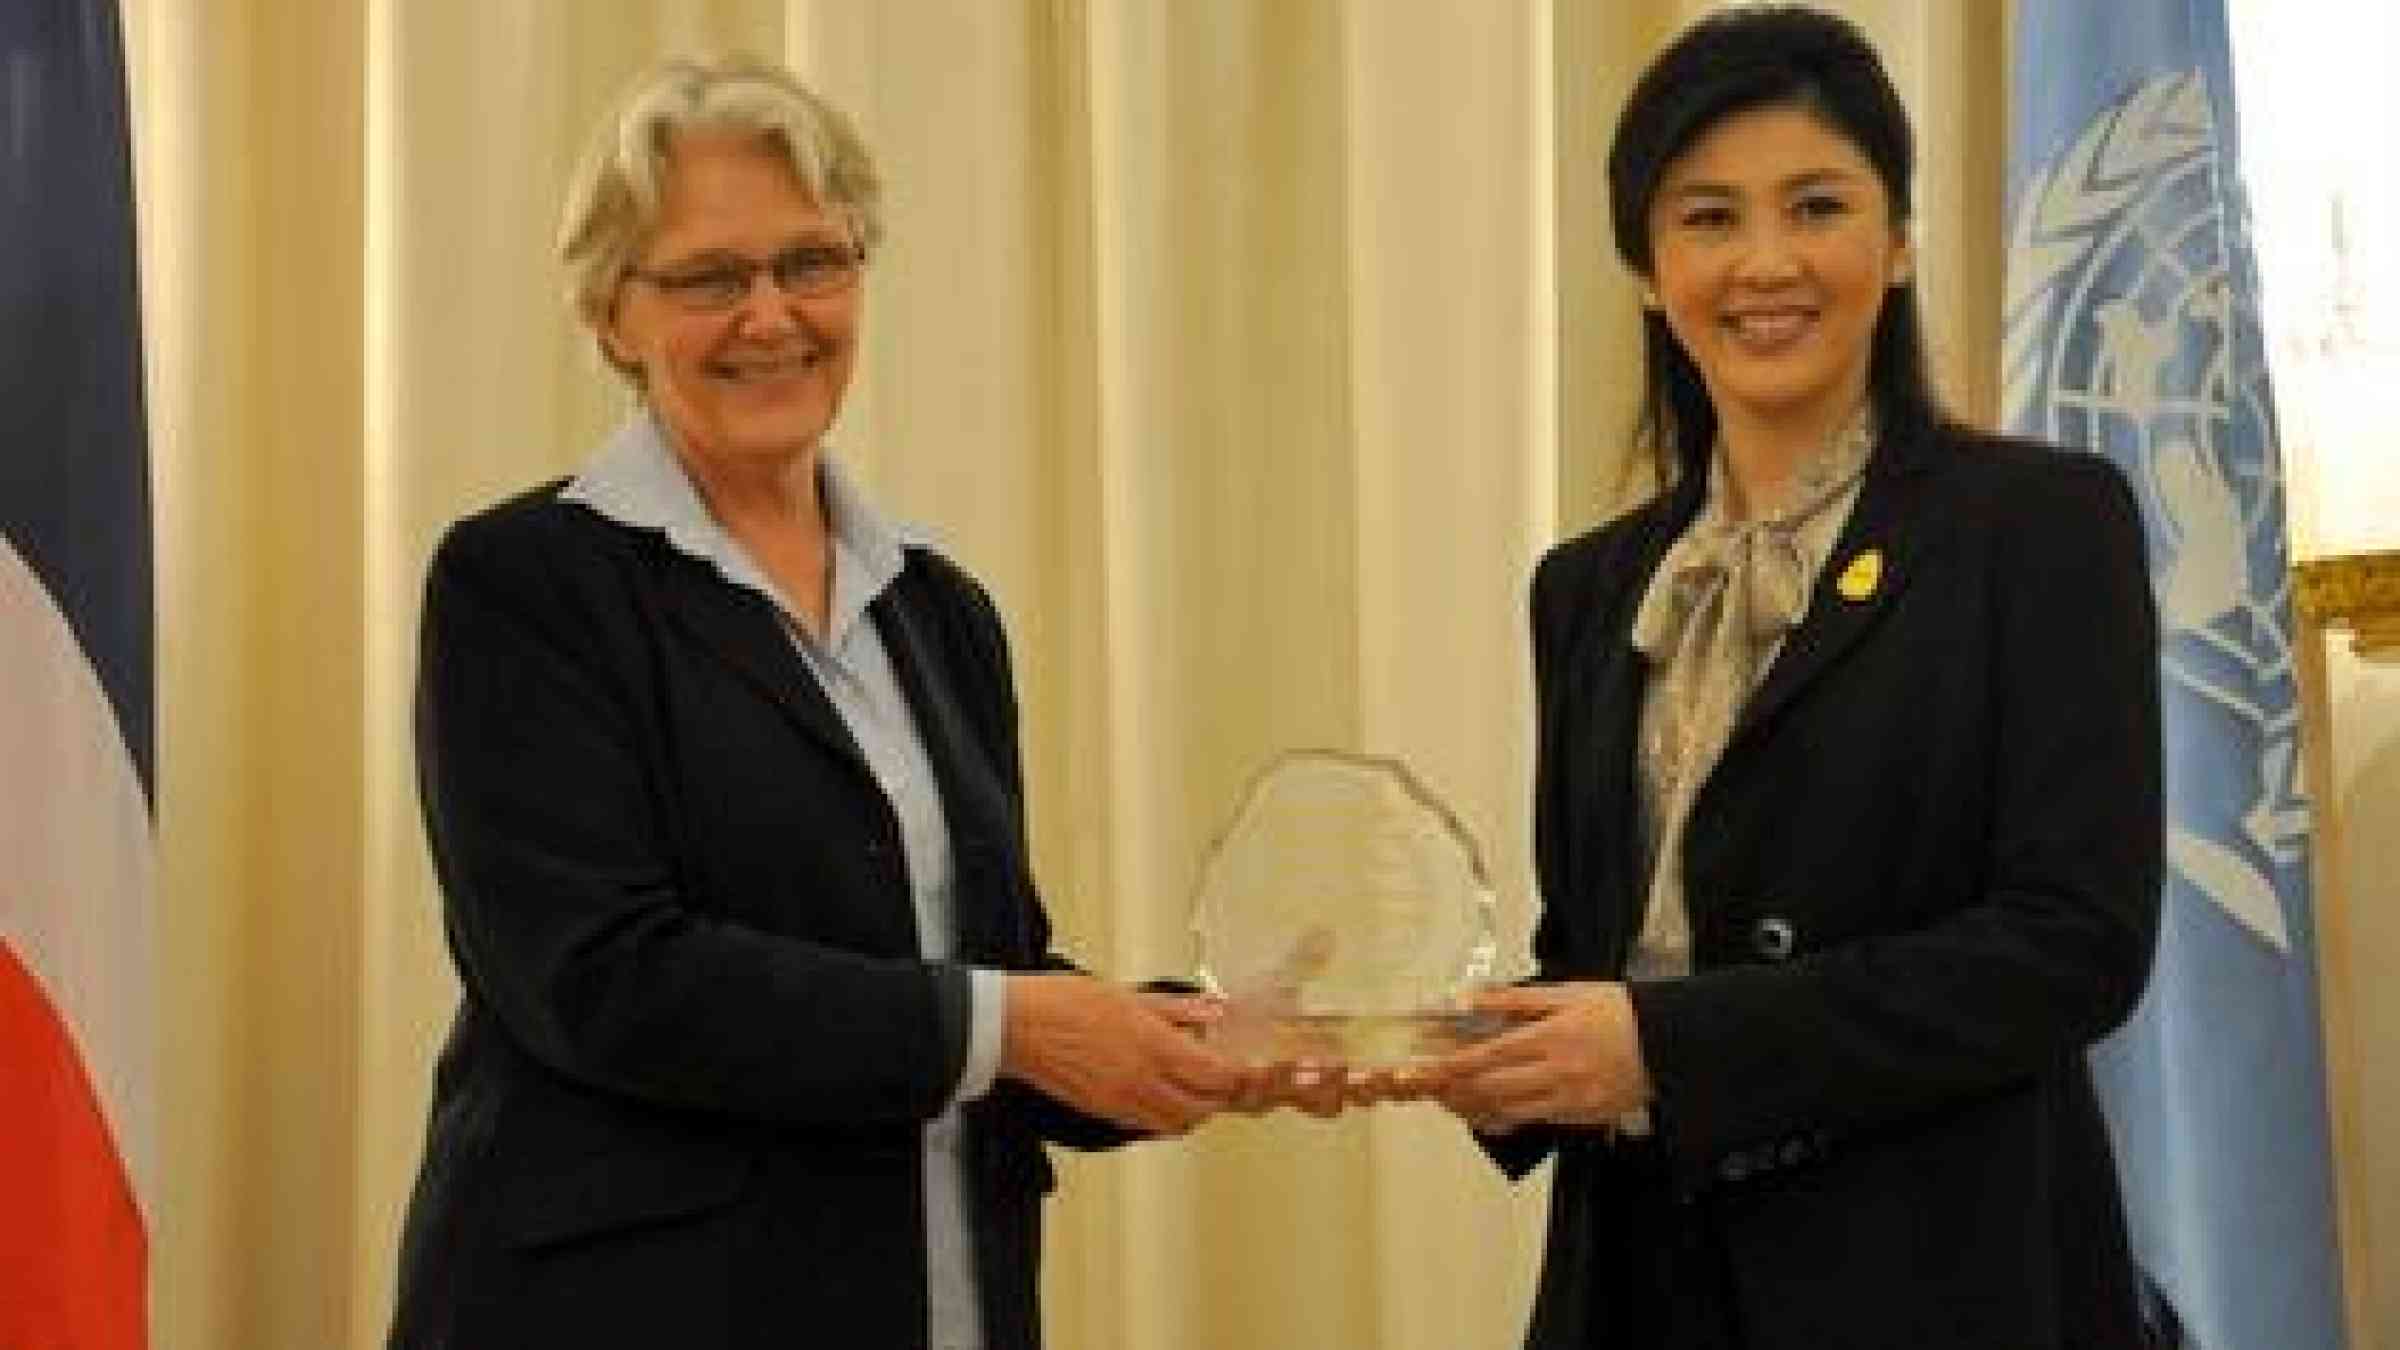 From left: Margareta Wahlström, UN Special Representative of the Secretary-General for Disaster Risk Reduction and Yingluck Shinawatra, Prime Minister of Thailand.